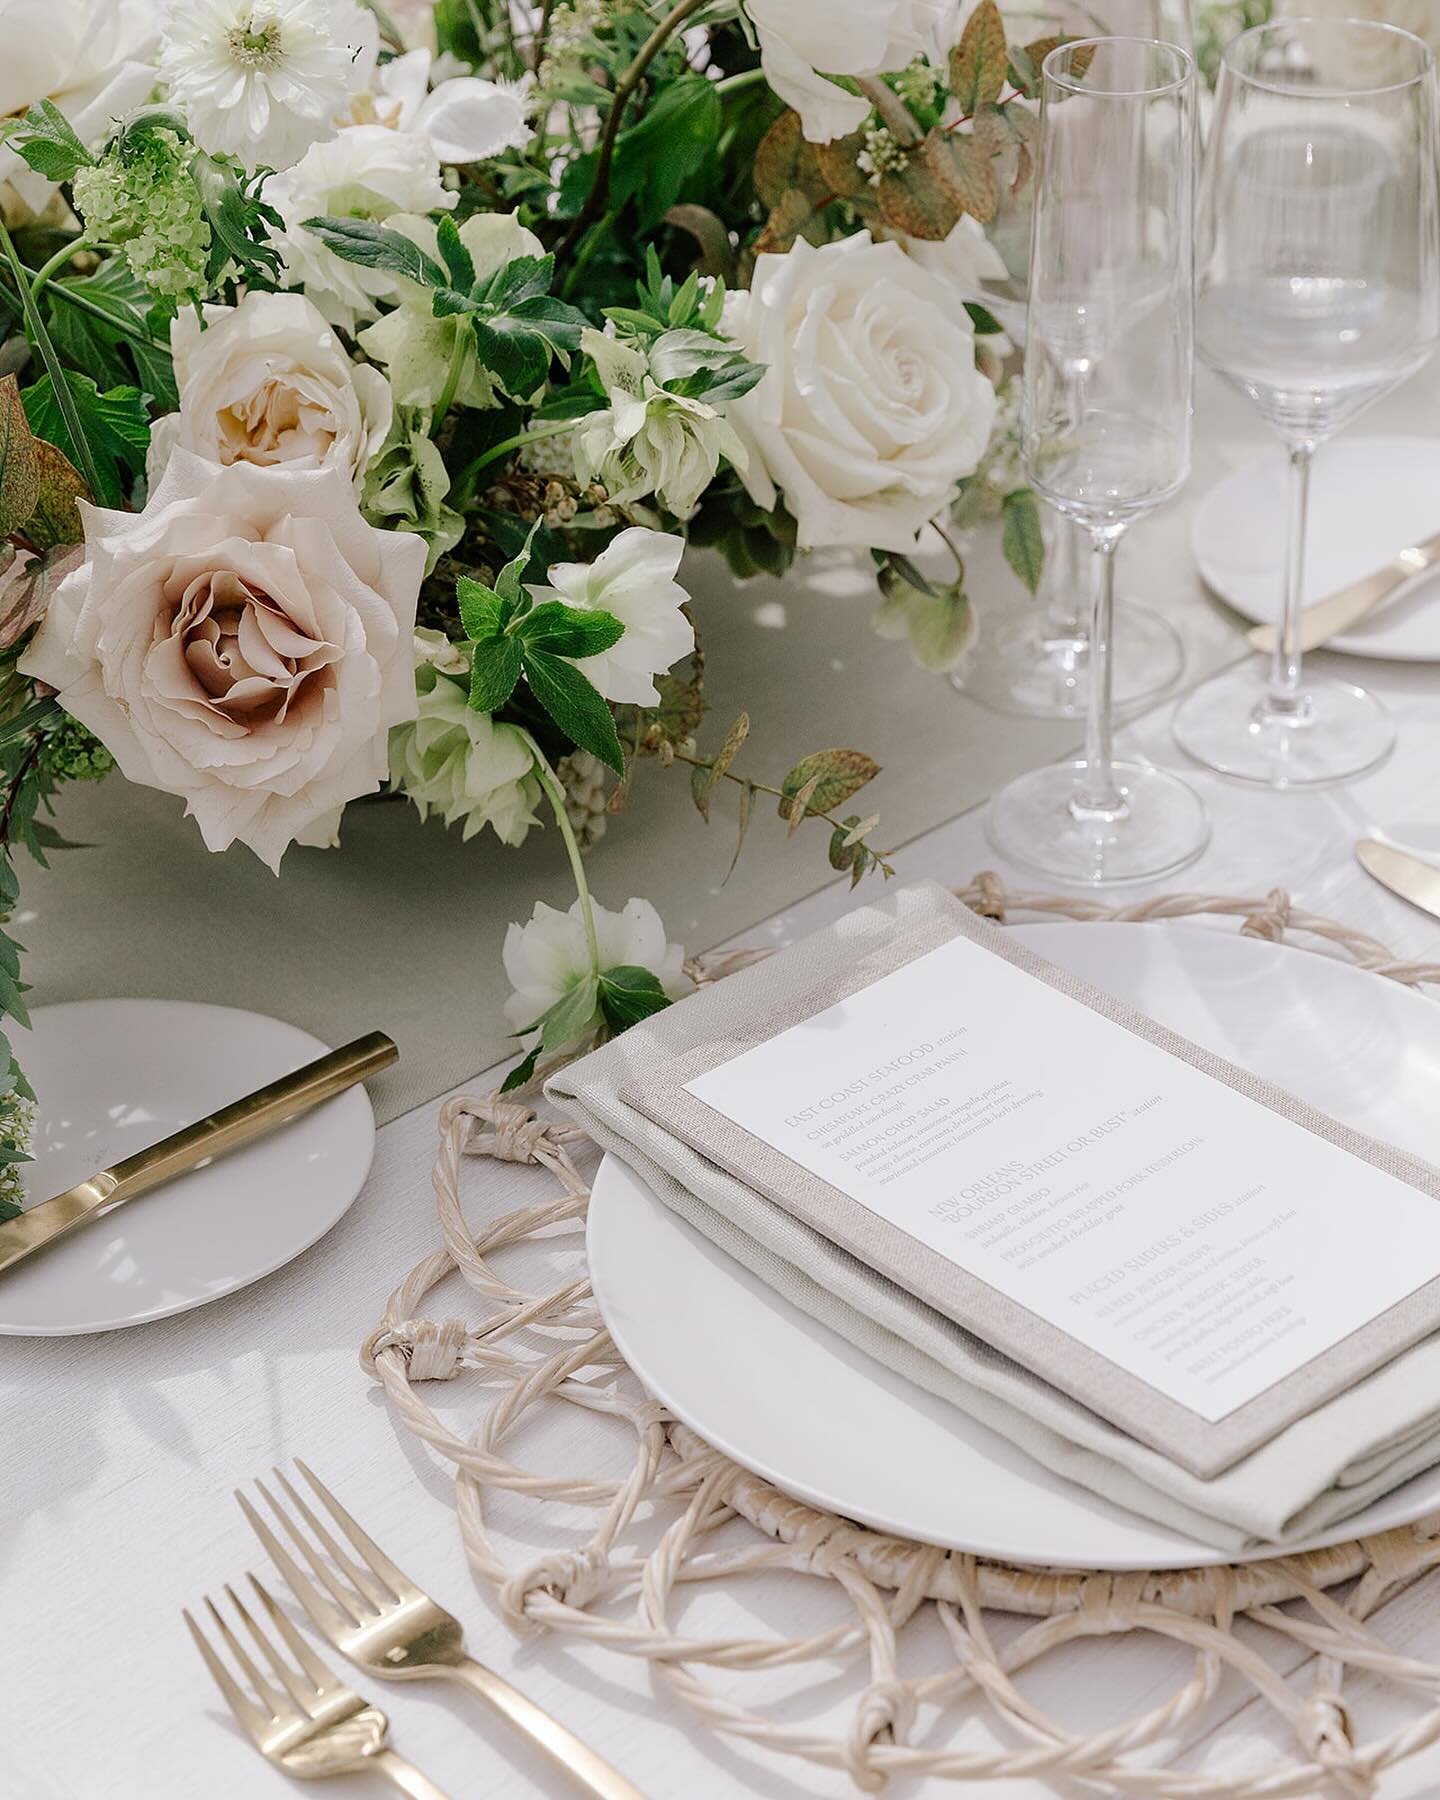 a classic 🕊️
planning + design by @mandymarieevents 
captured by @mashaida.co